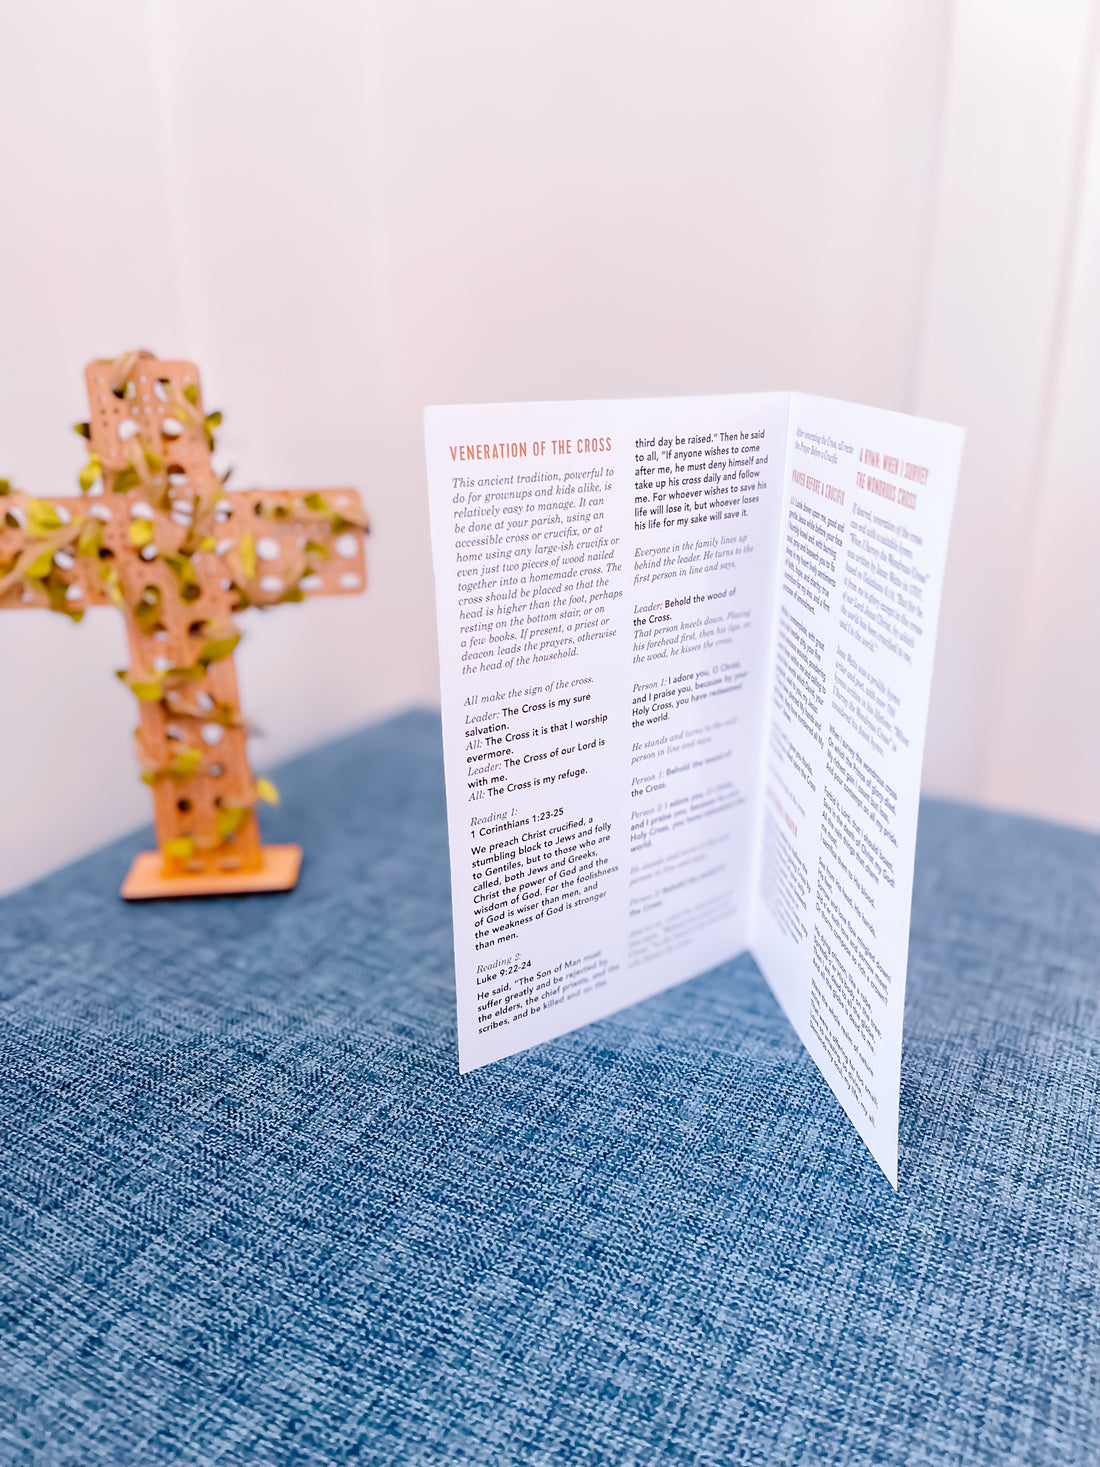 At-Home Veneration of the Cross Kit